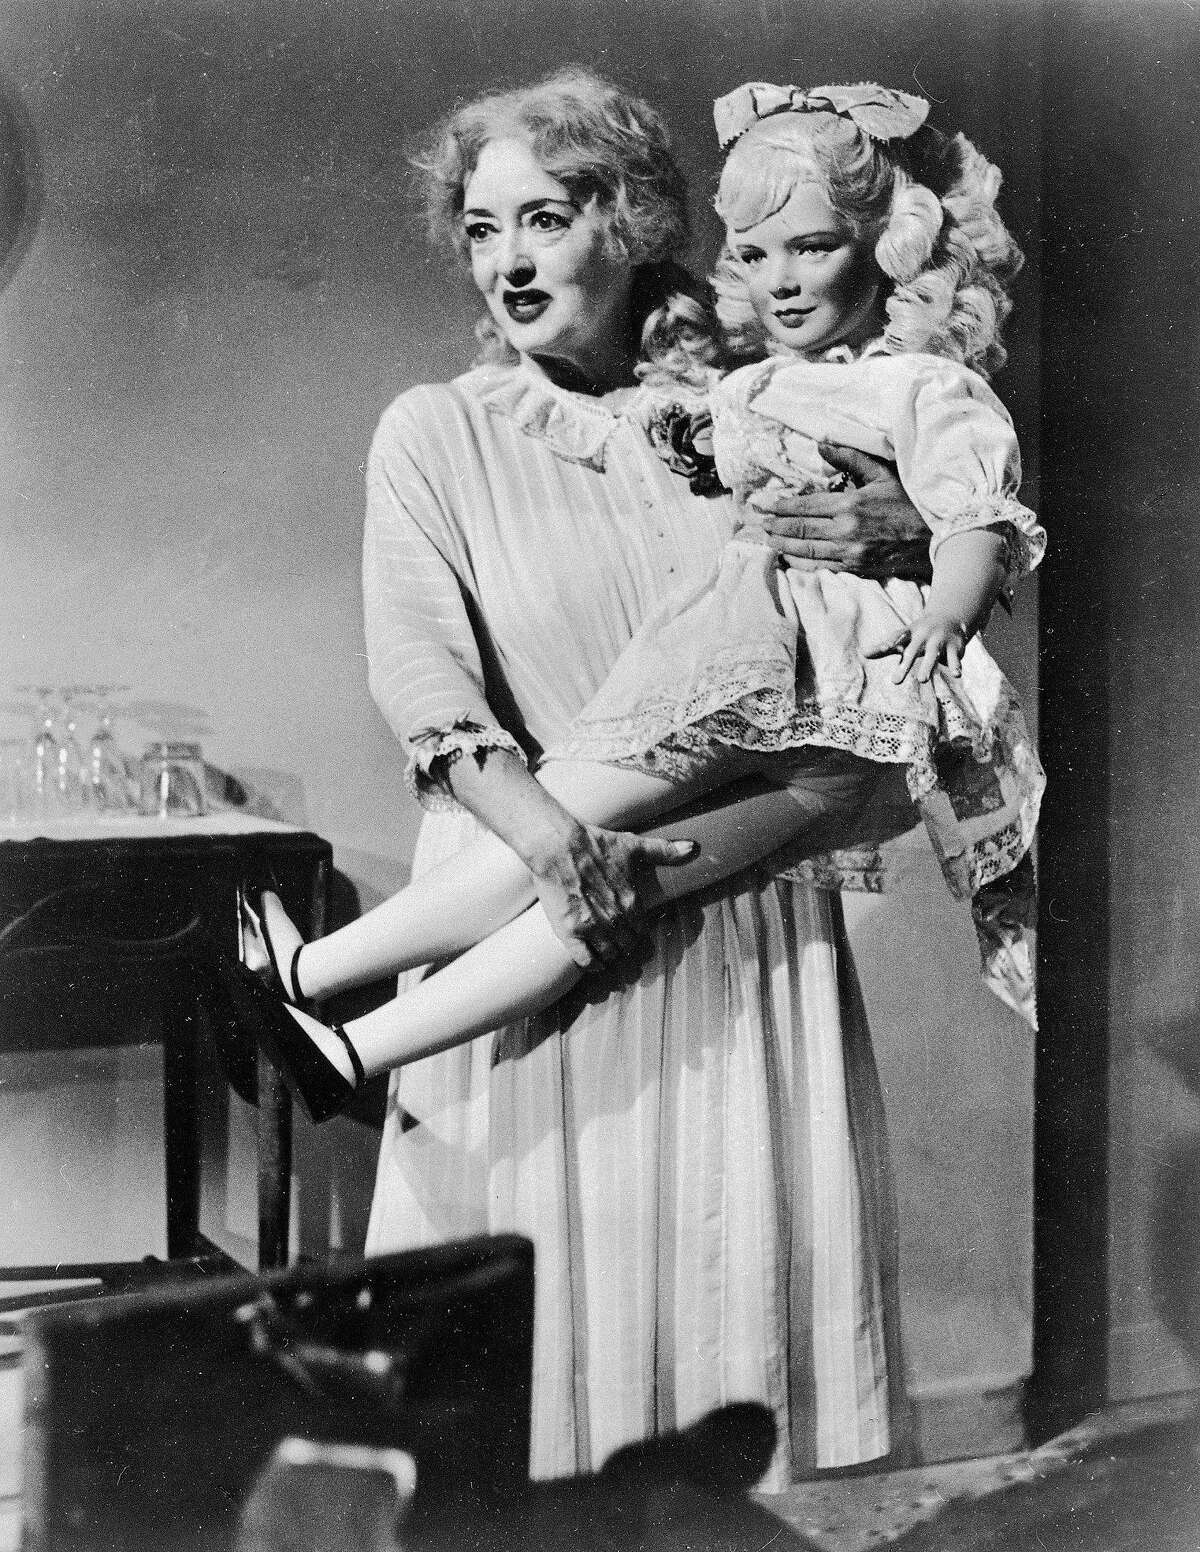 Actress Bette Davis is shown in a scene from the film "Whatever Happened To Baby Jane?", 1963. (AP Photo)